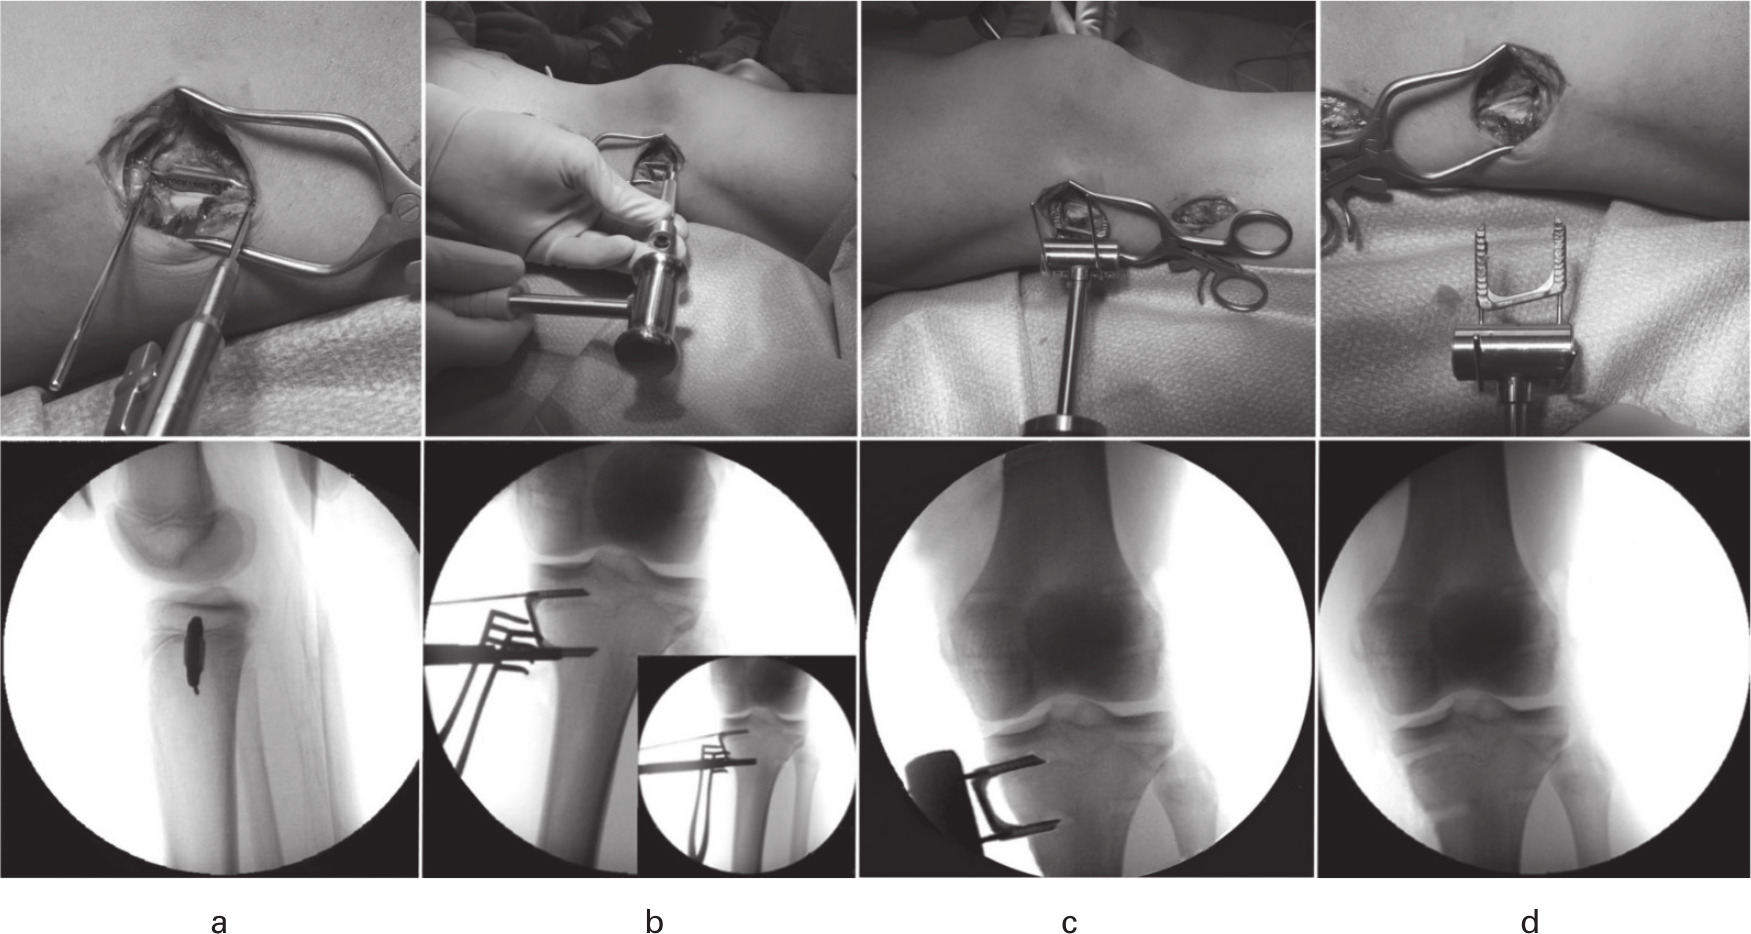 Fig. 2 
            Explantation of a rigid staple (same patient shown in Figure 7). a) Kirschner wire threaded into the staple prongs after exposure followed by b) chisel insertion to clear the interface and c) extraction with sliding hammer to d) fully remove the staple without residual bone.
          